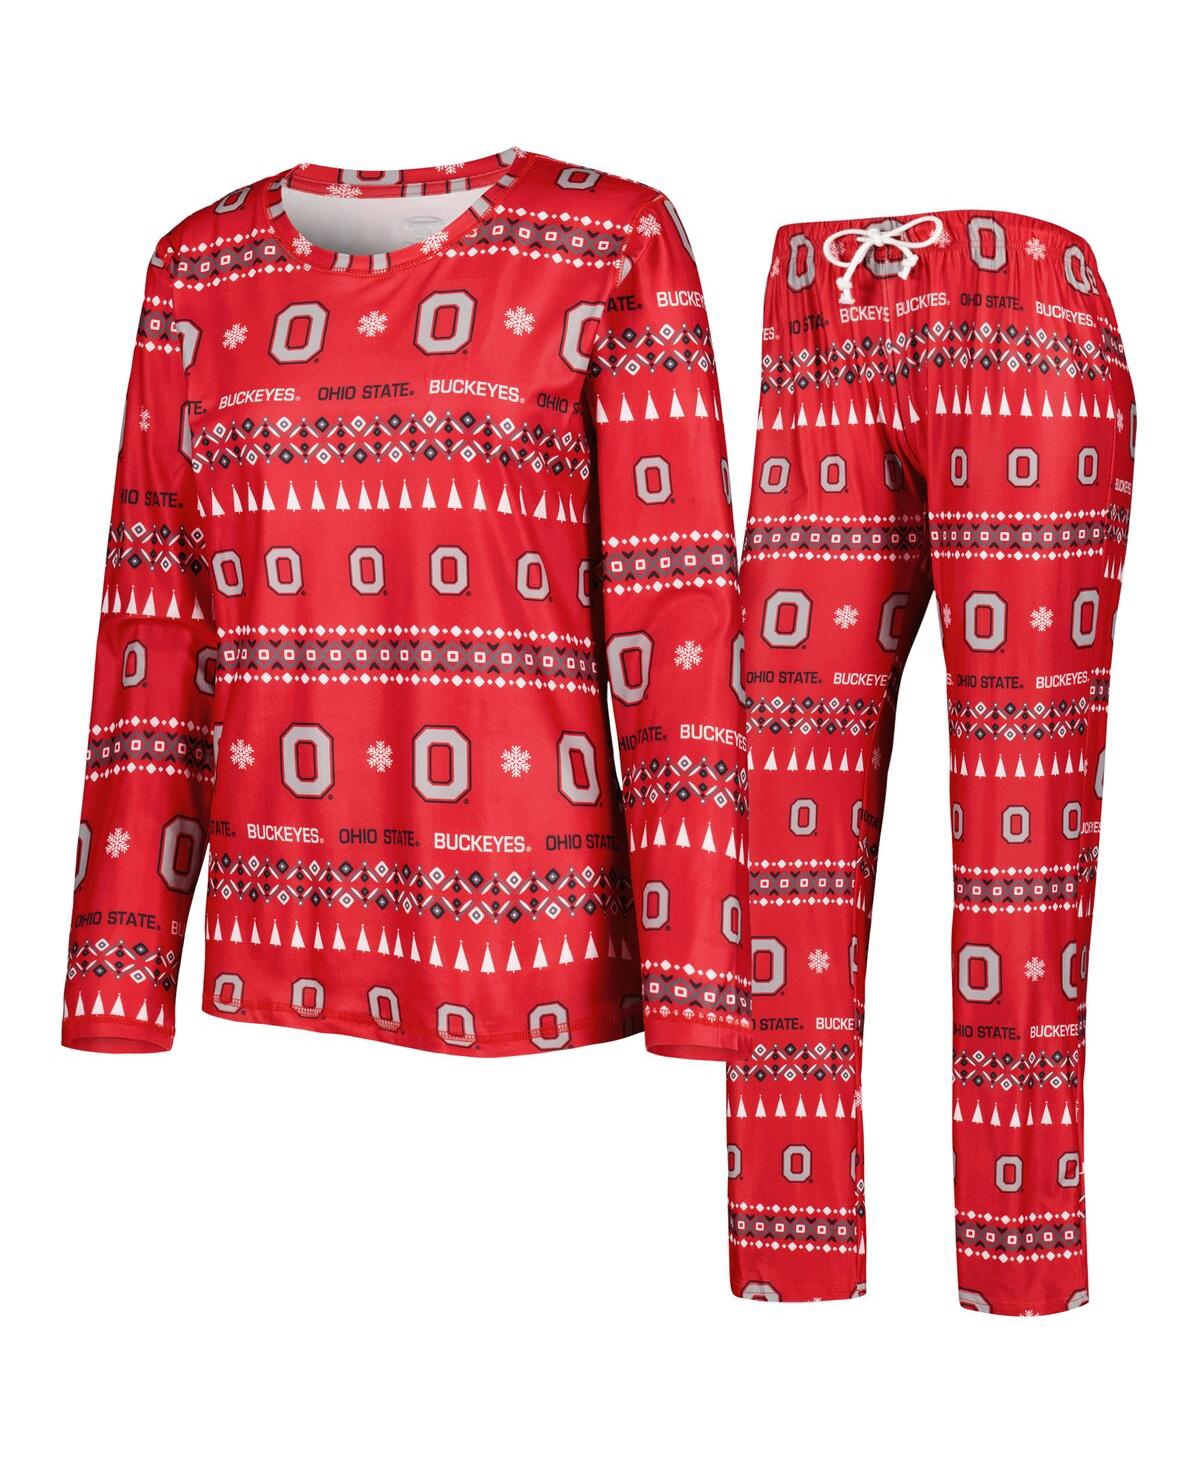 Women's Concepts Sport Scarlet Ohio State Buckeyes Flurry Ugly Sweater Long Sleeve T-shirt and Pants Sleep Set - Scarlet